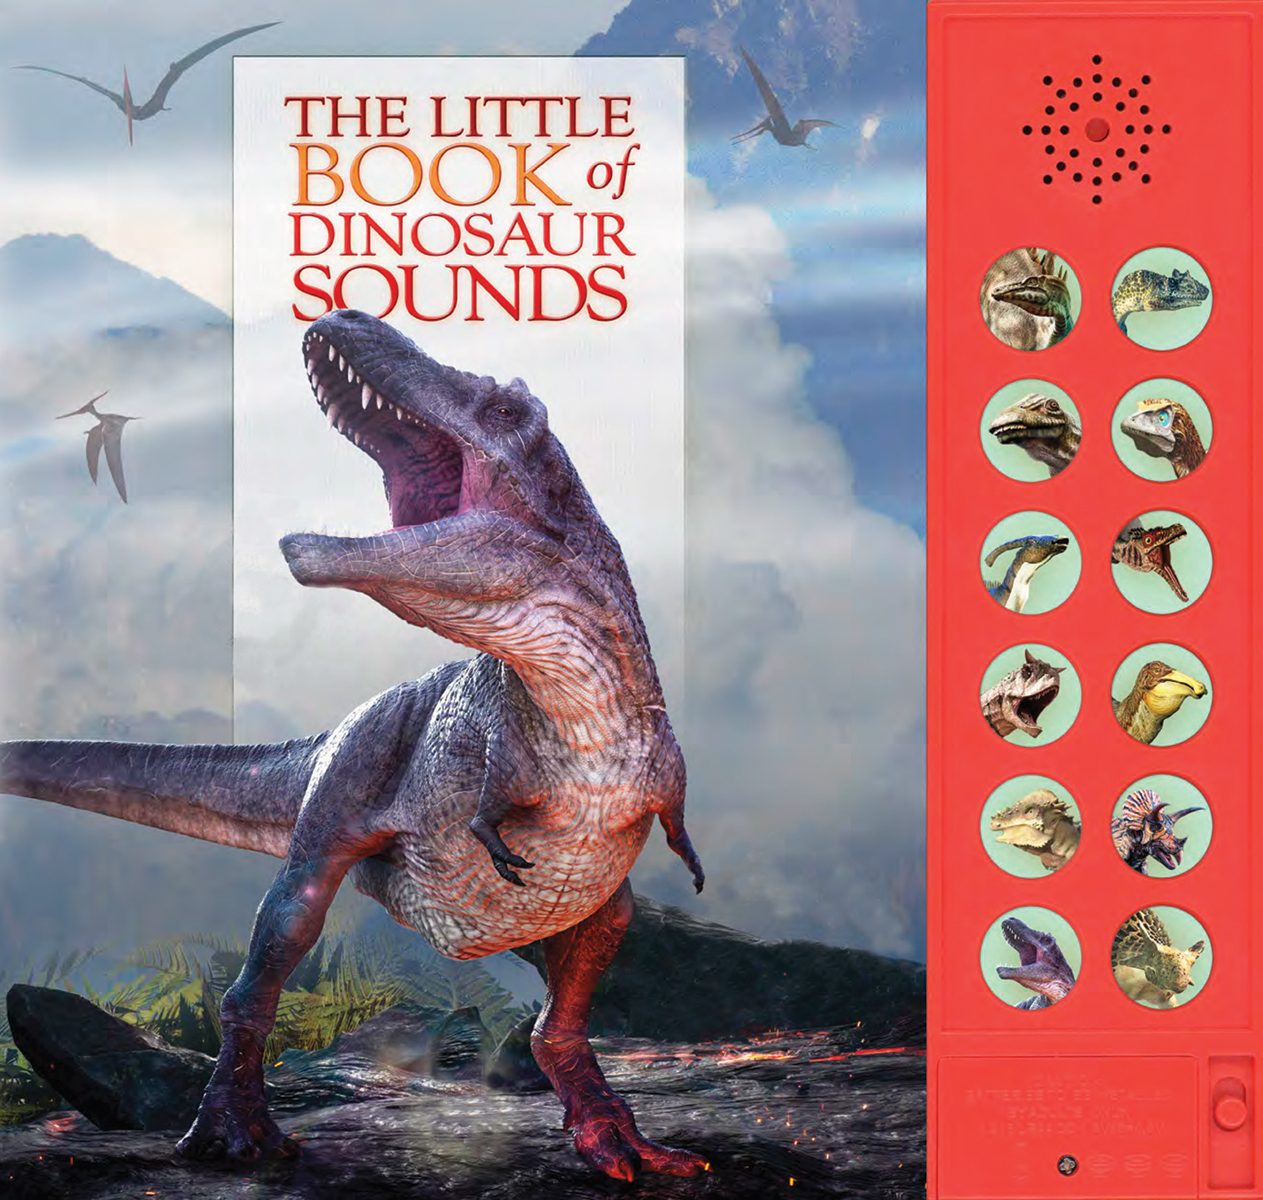 Little Book of Dinosaur Sounds, The